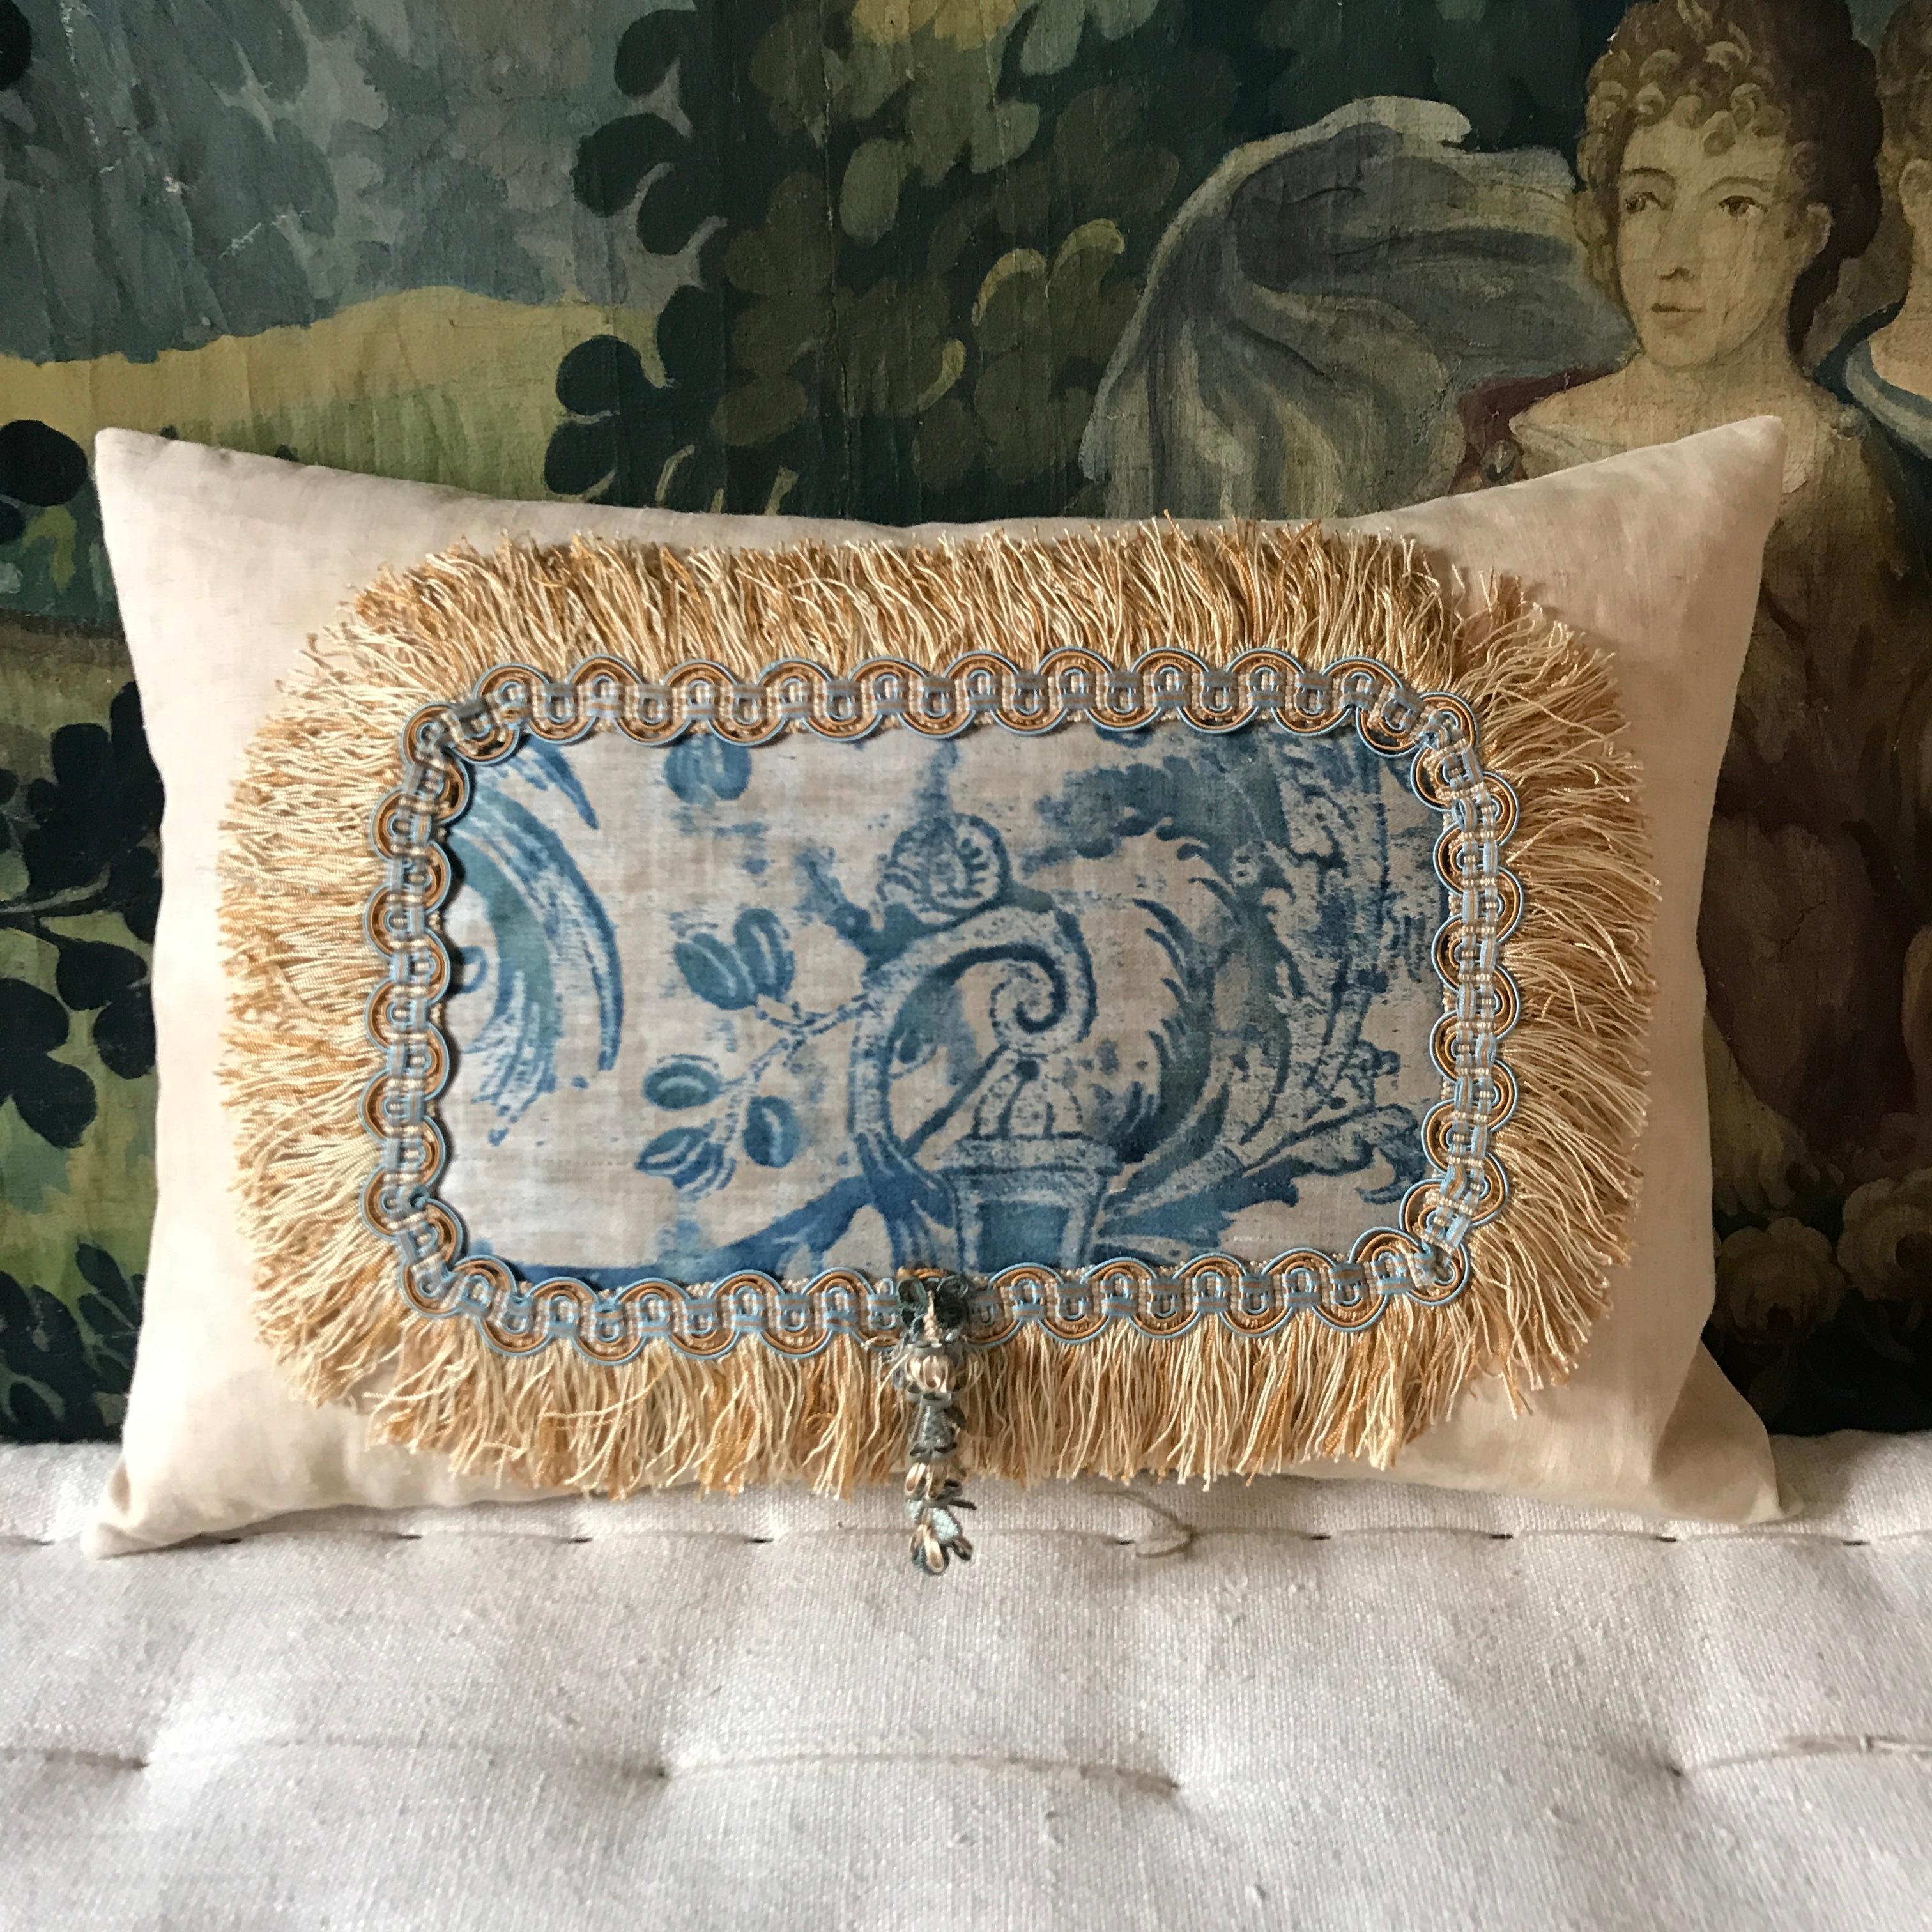 Rare hand blocked Fortuny textile circa 1910 - an unusual design now discontinued featuring fauns and snails - this panel has a snail and has been placed on antique Italian silk then bordered with a complimentary silk fringe finished with a hand